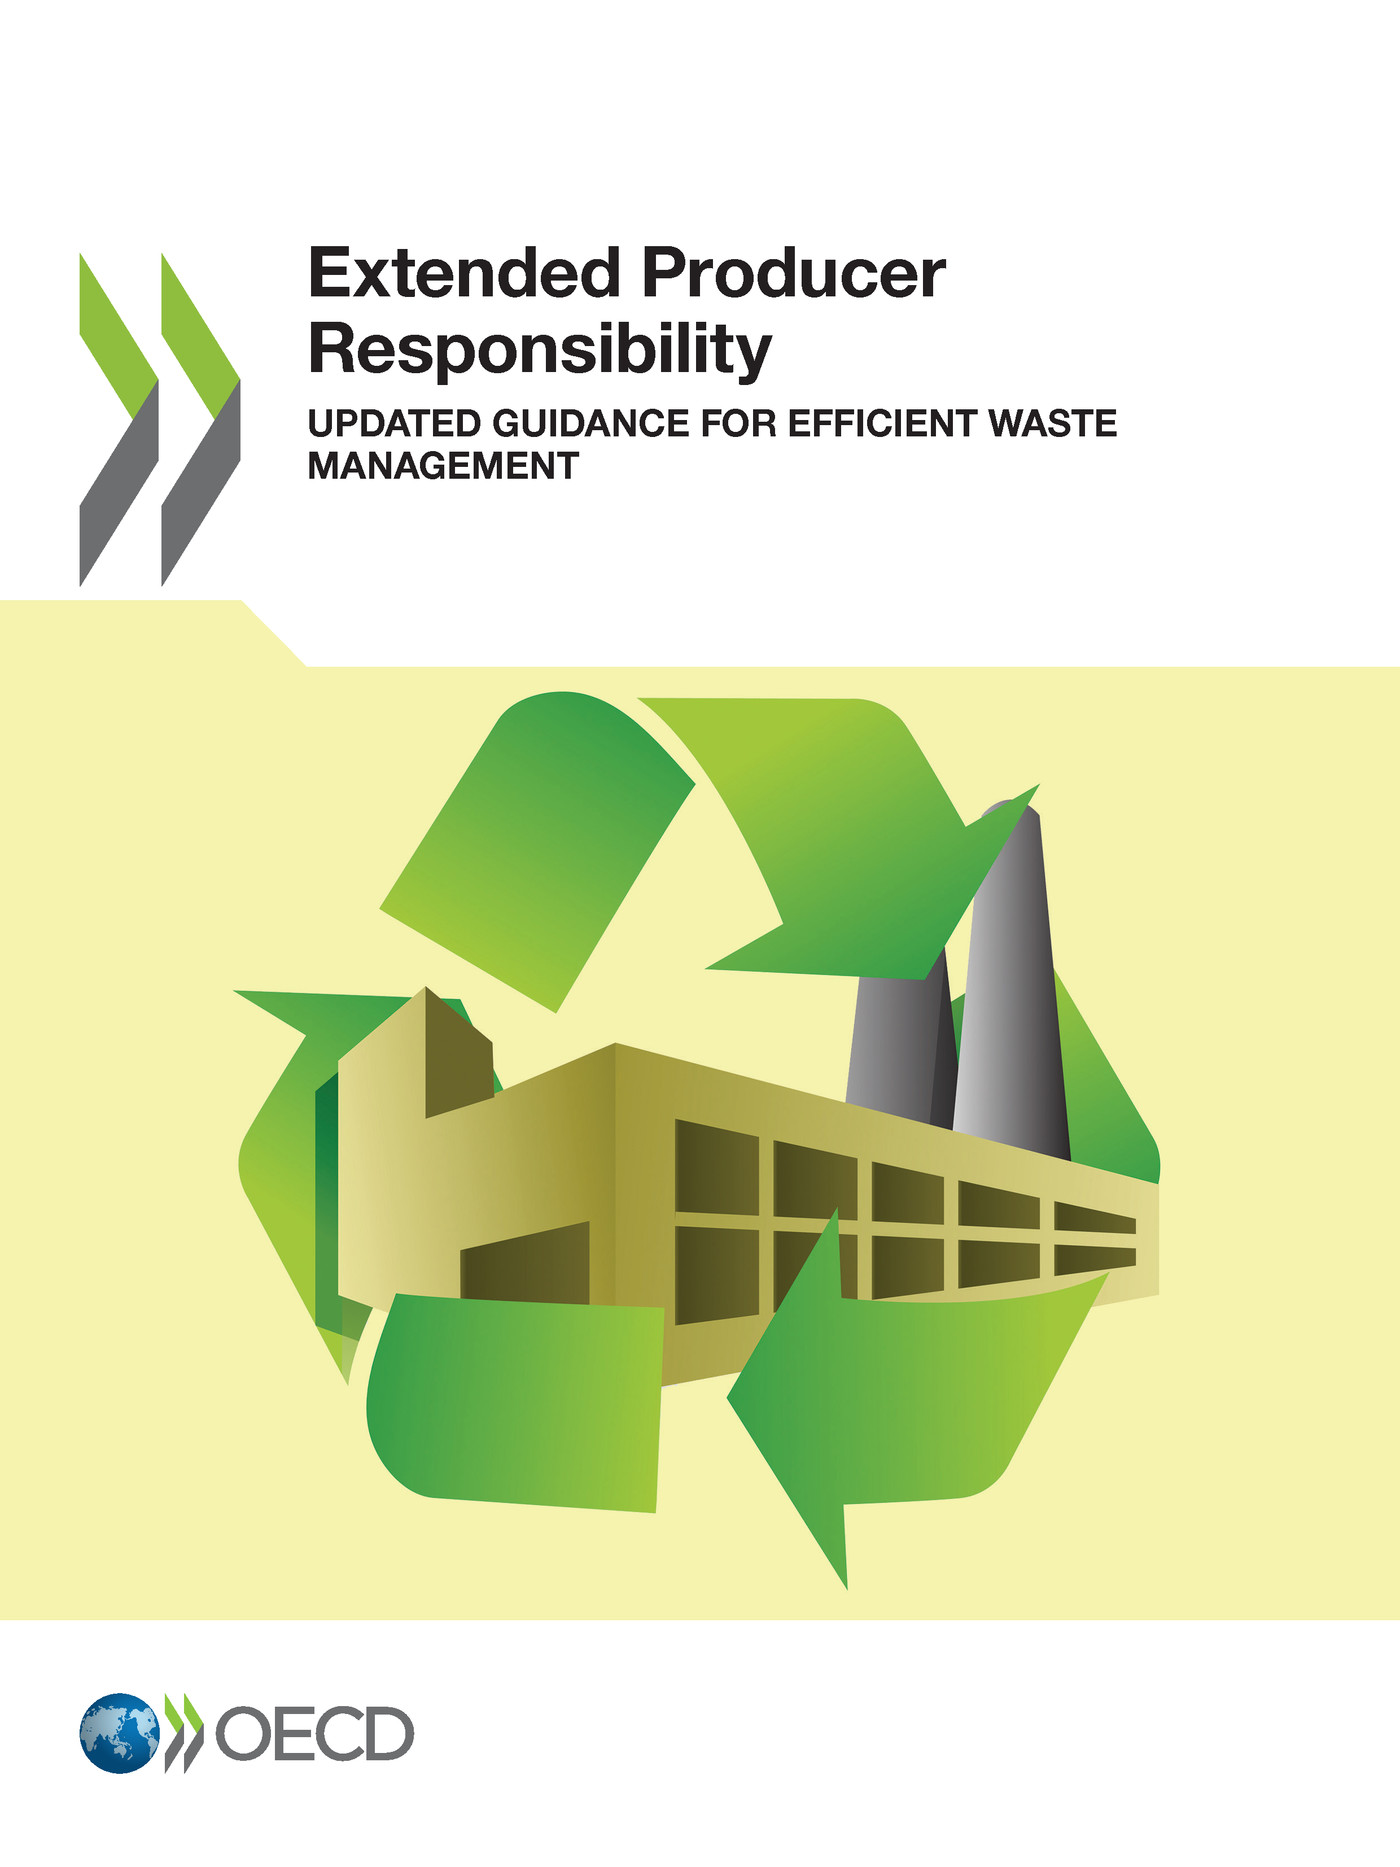 Extended Producer Responsibility -  Collectif - OCDE / OECD